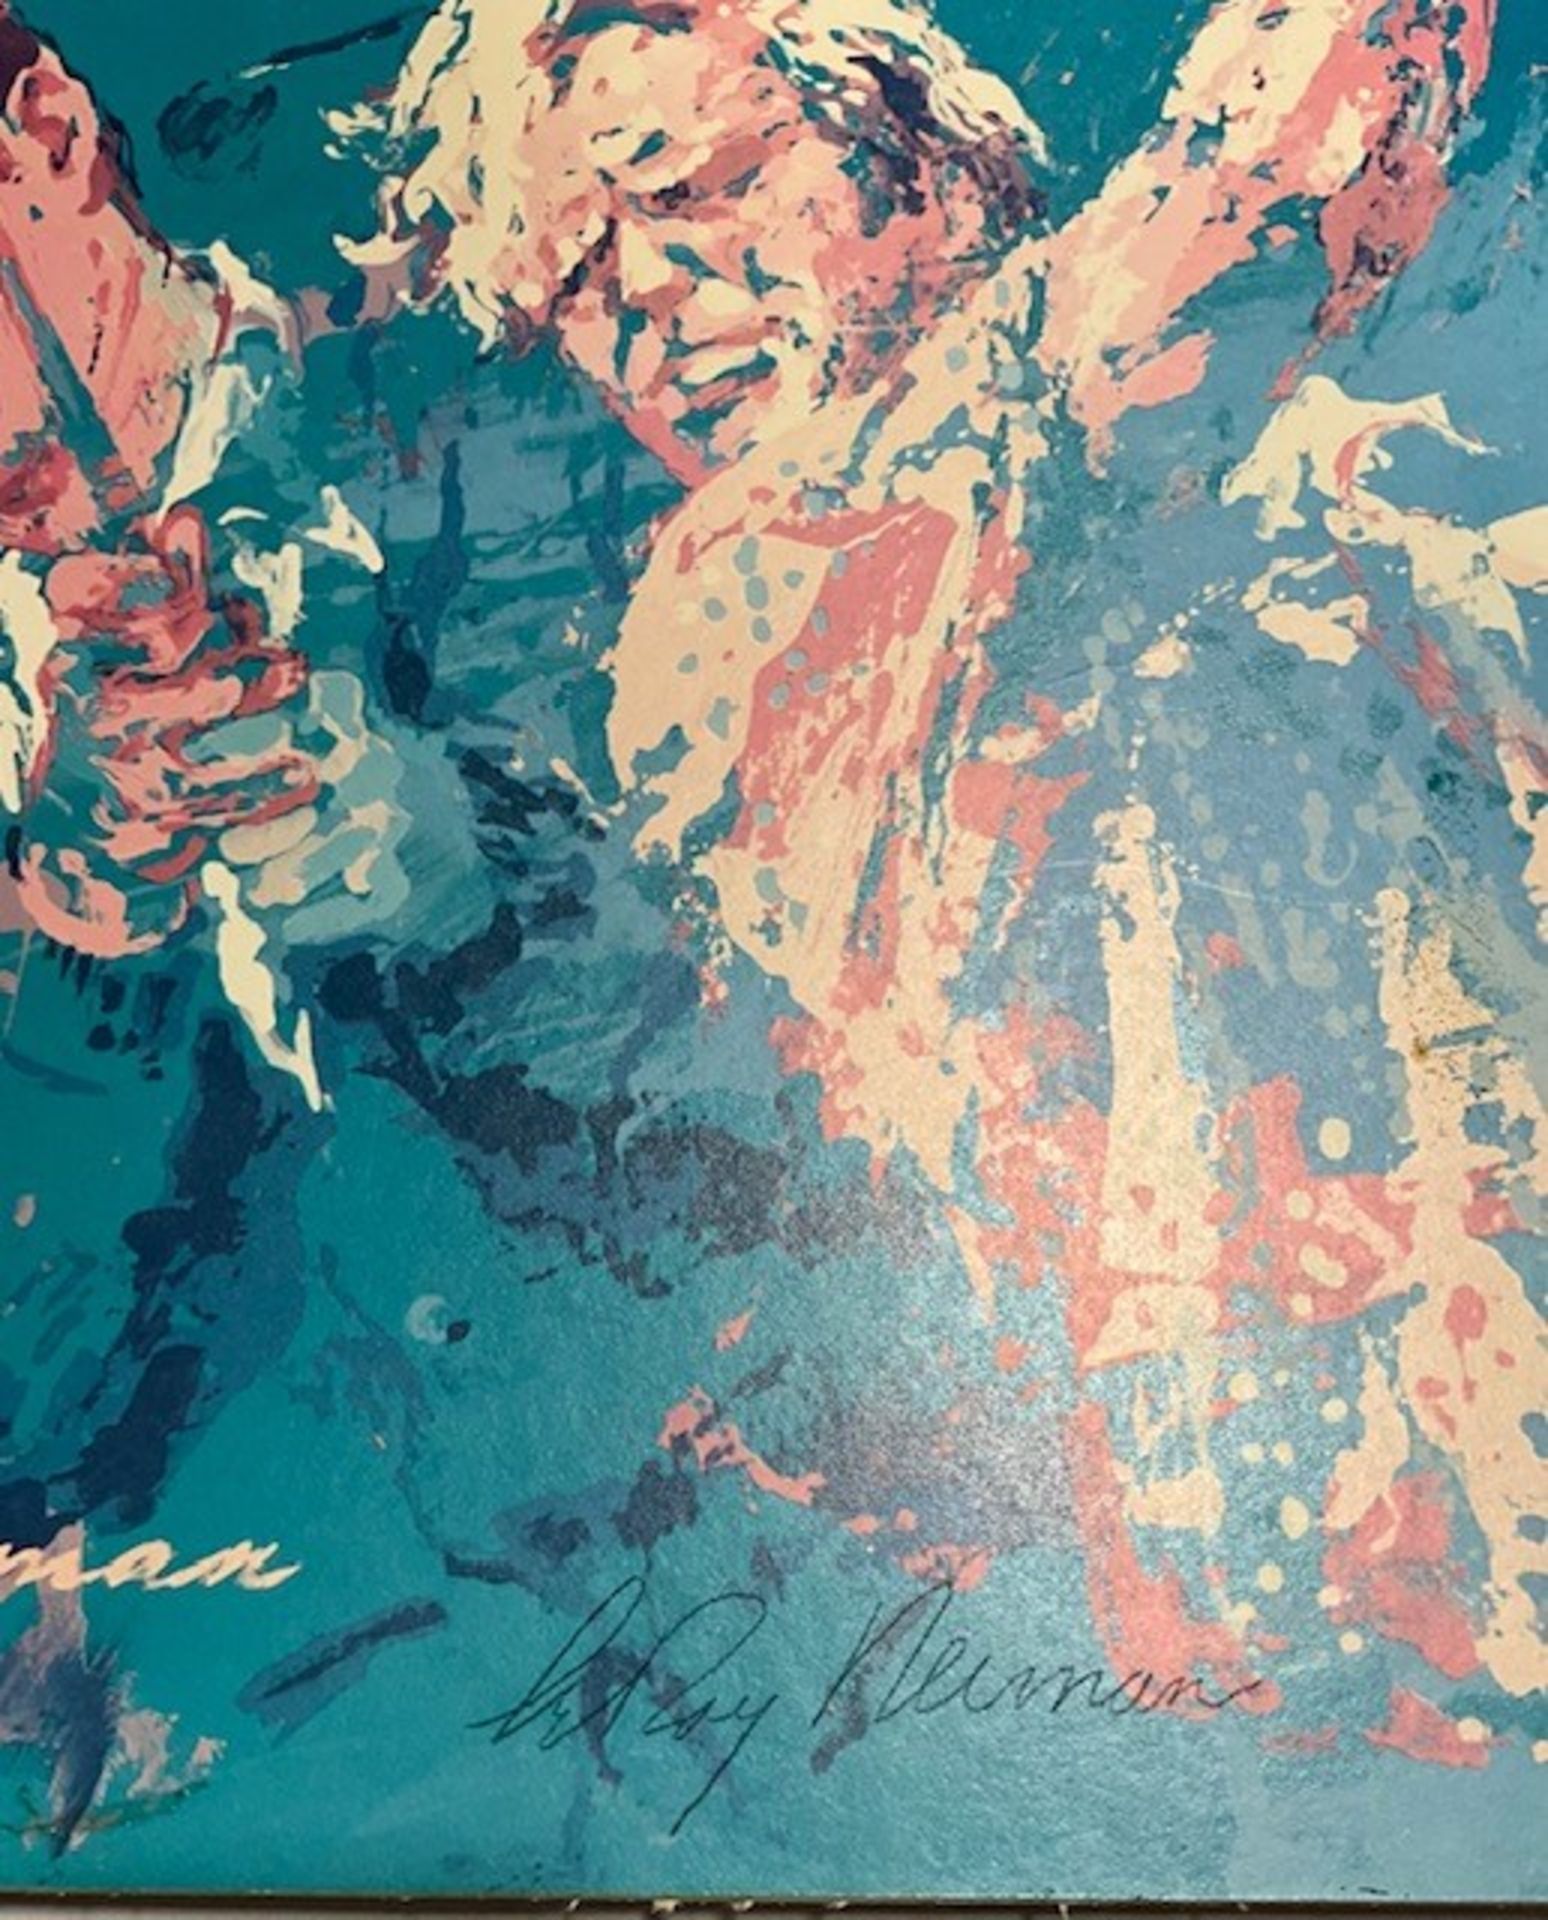 Leroy Neiman Hand Signed "Golfers" Poster - Image 7 of 9